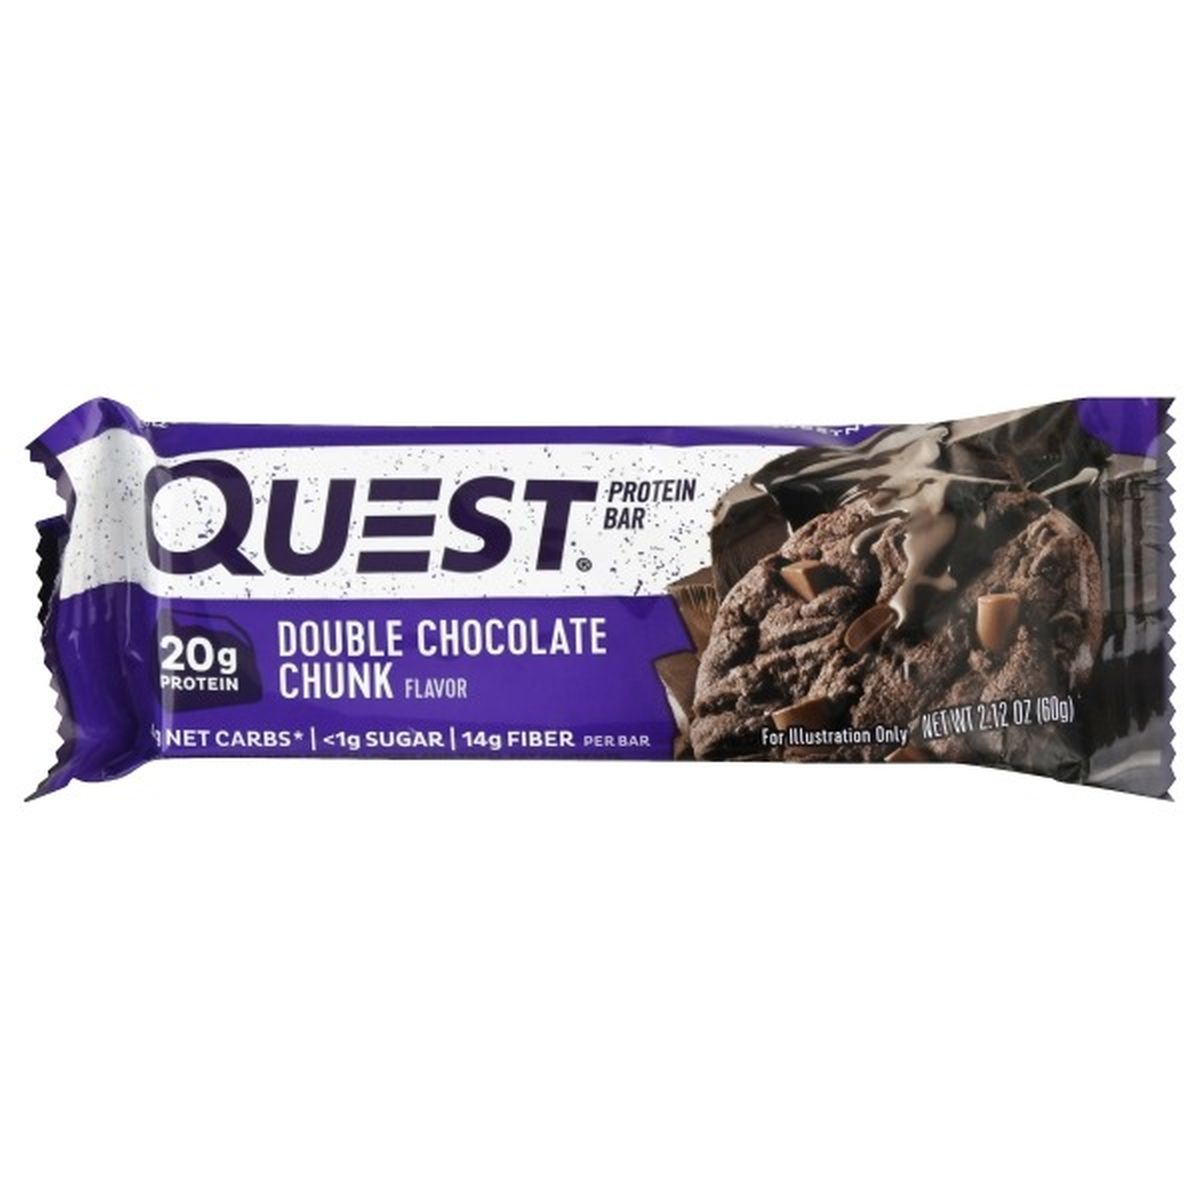 Calories in Quest Protein Bar, Double Chocolate Chunk Flavor